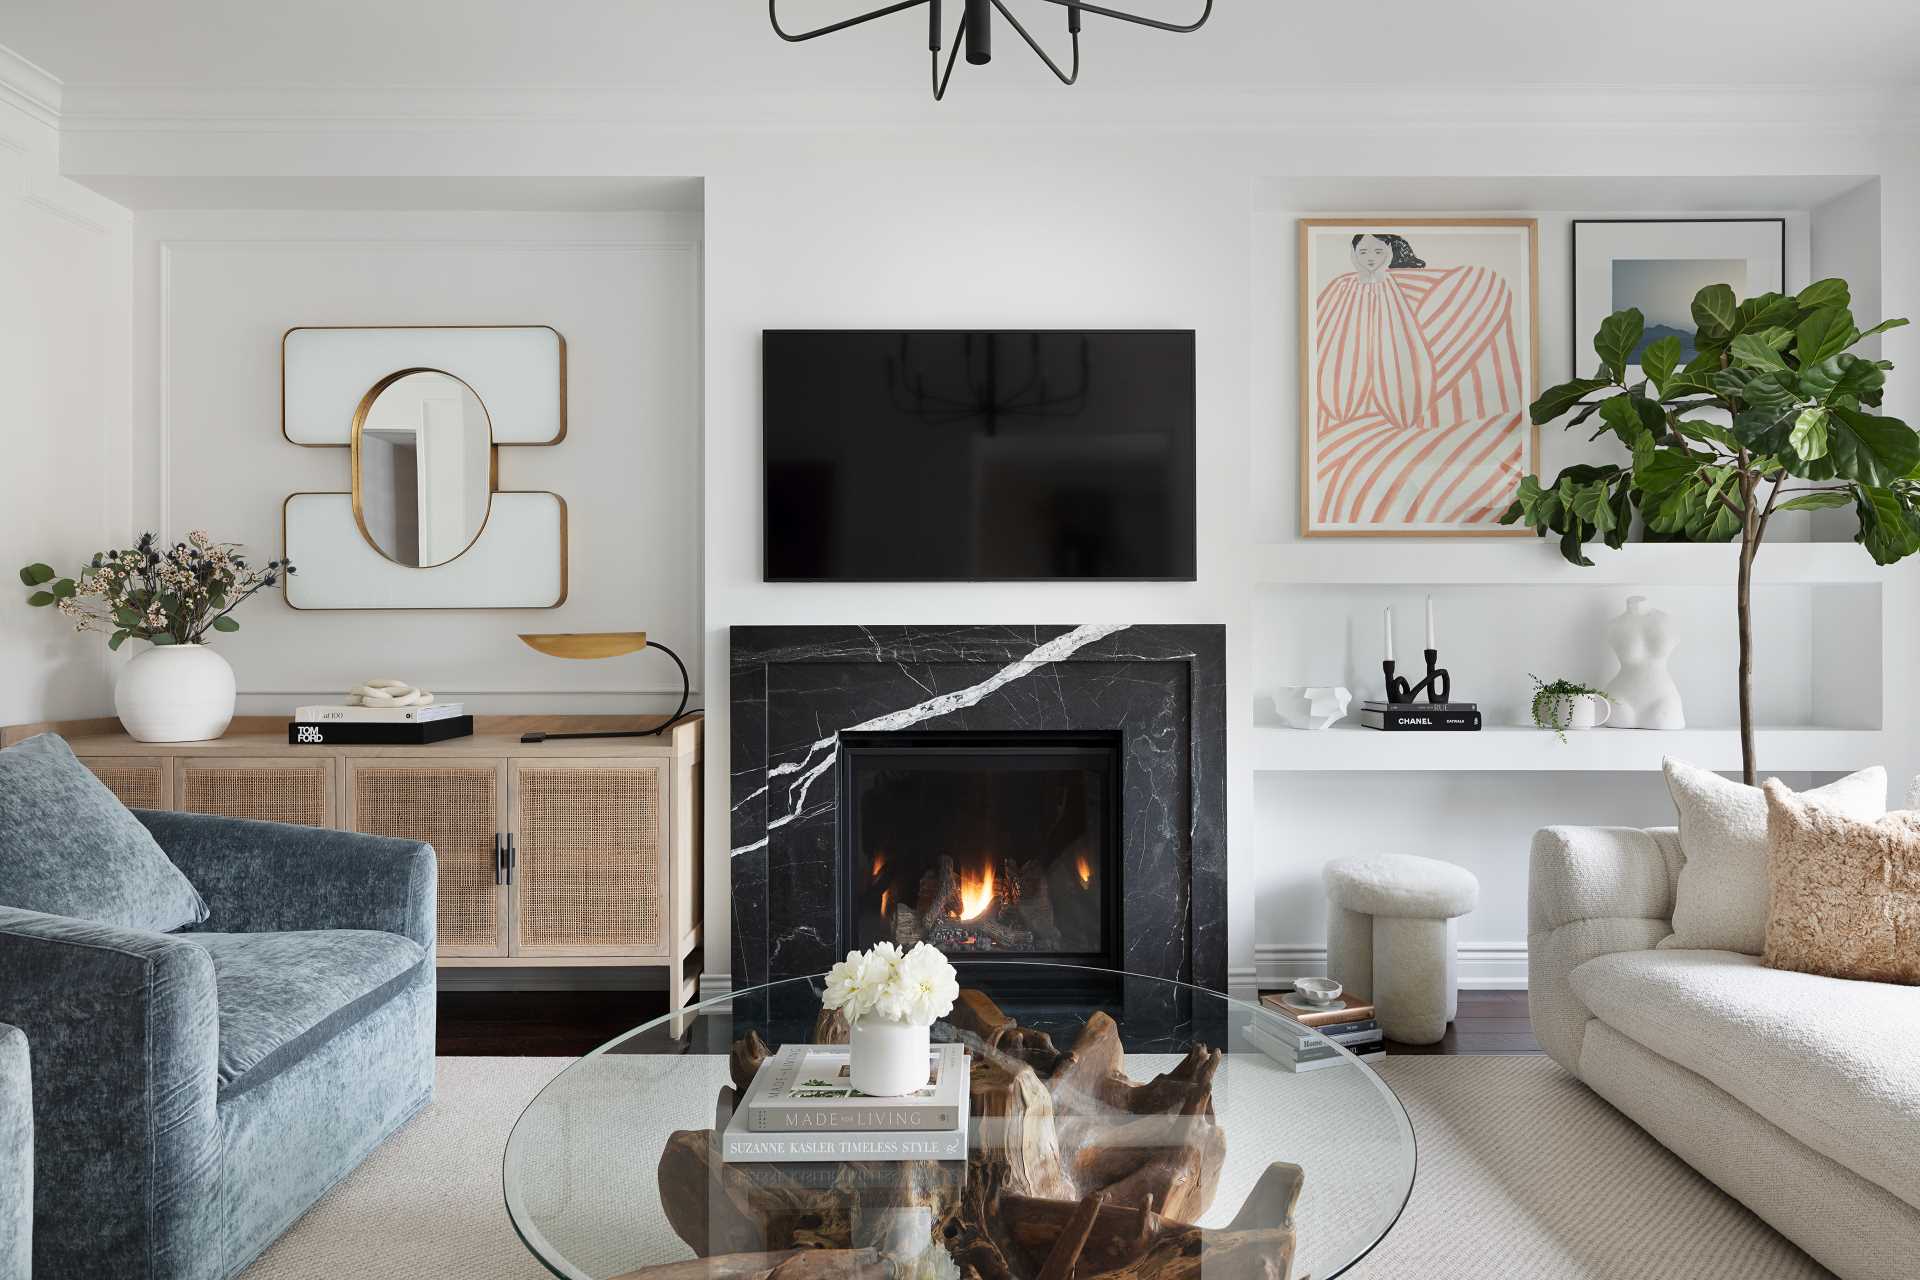 A living room that's casual in its design with a fireplace and TV, open shelving, and a wood cabinet with textured woven details.